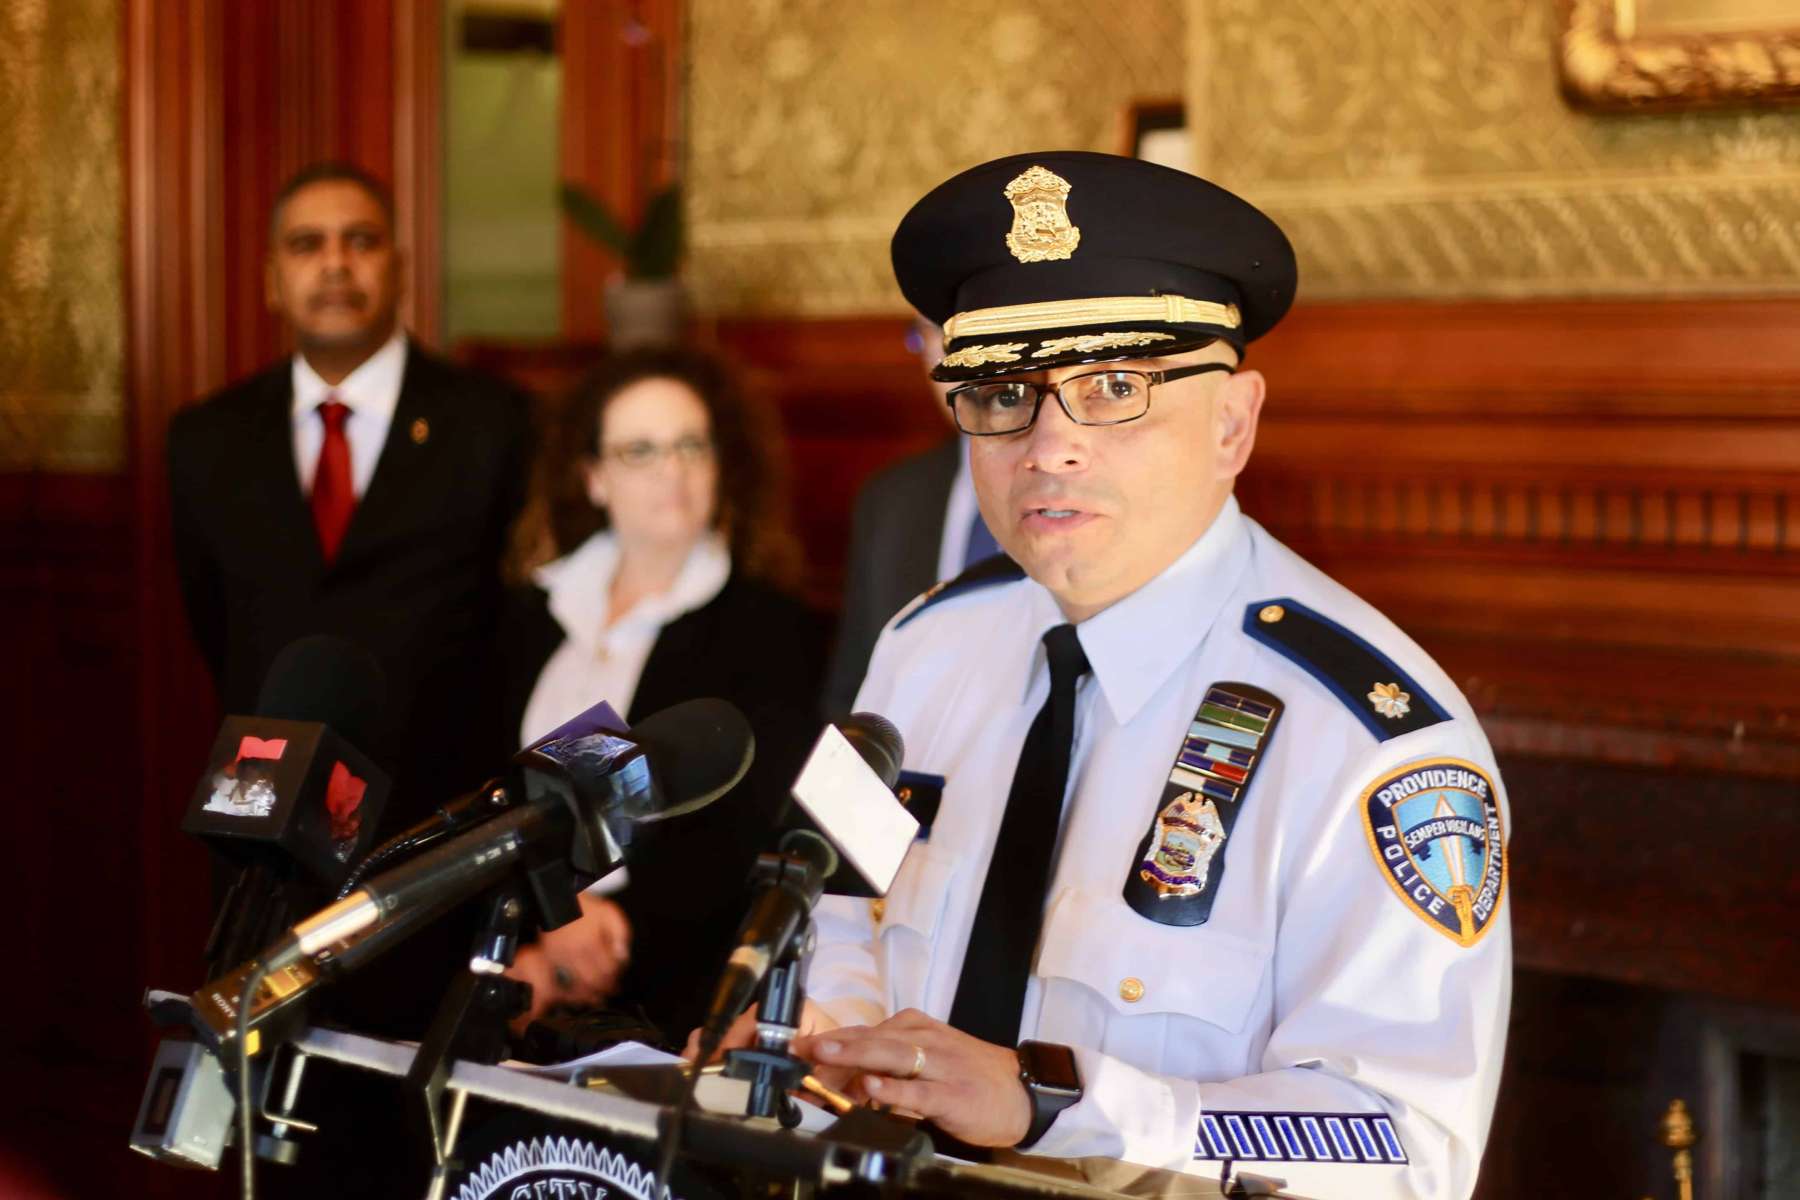 Oscar Perez is the next Chief of the Providence Police Department